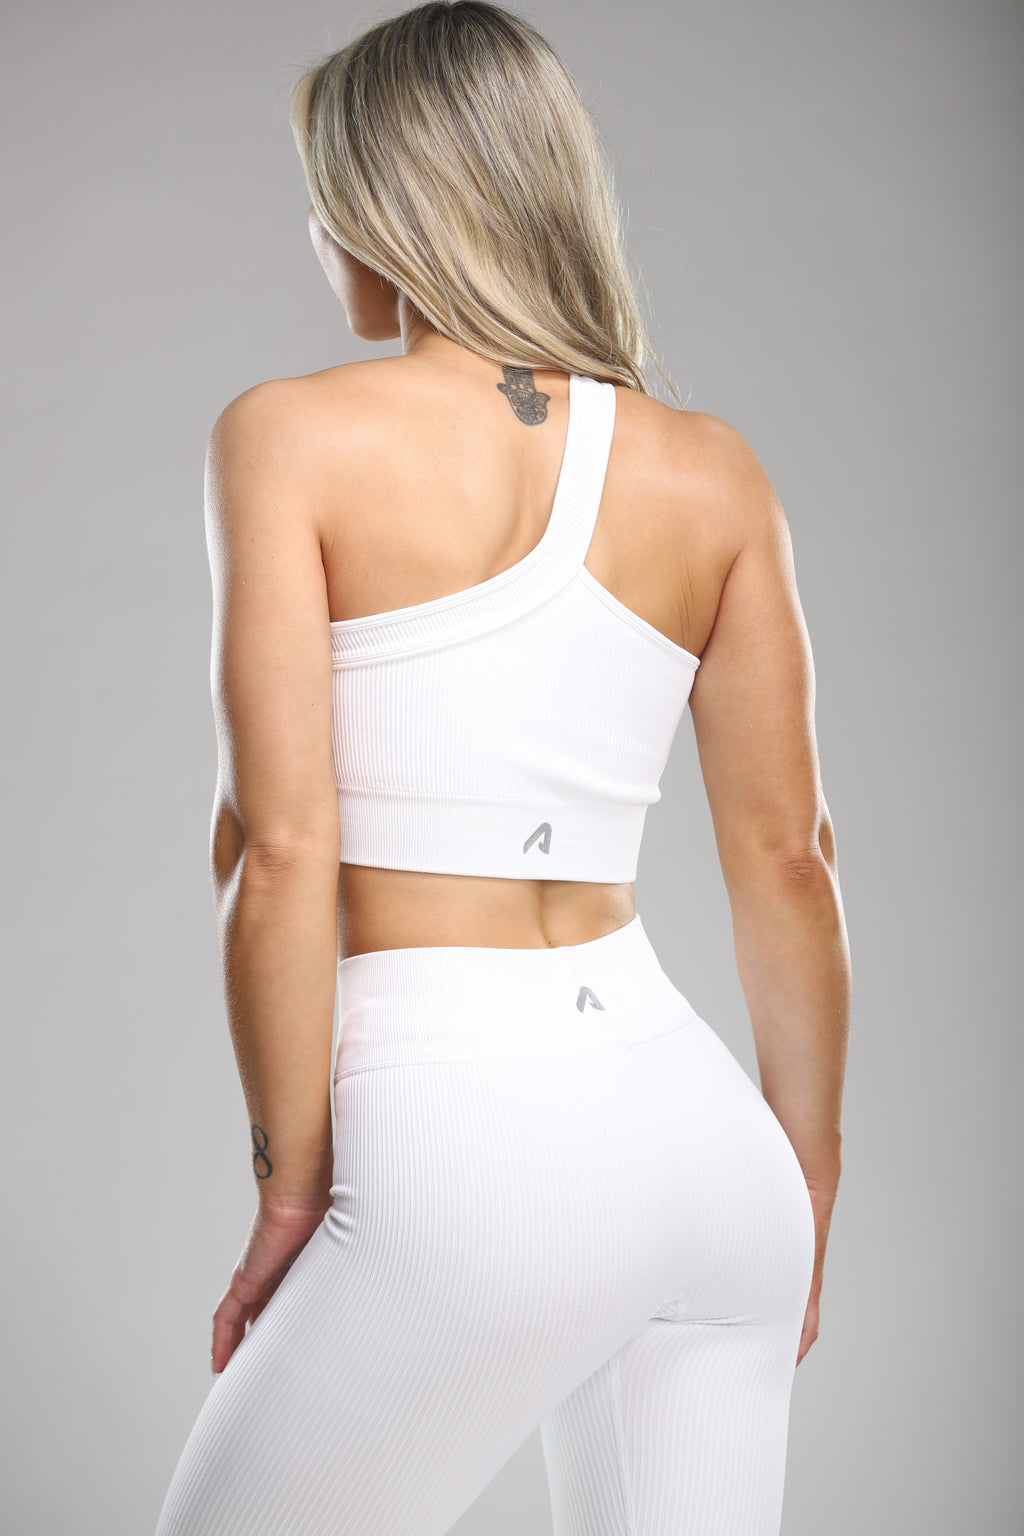 Edvintorg Sports Braa Casual Large Size Women Beautiful Back Yoga Vest  Fitness Running Sexy Underwear Composite Fabric One-Piece Sports Bra  Valentines